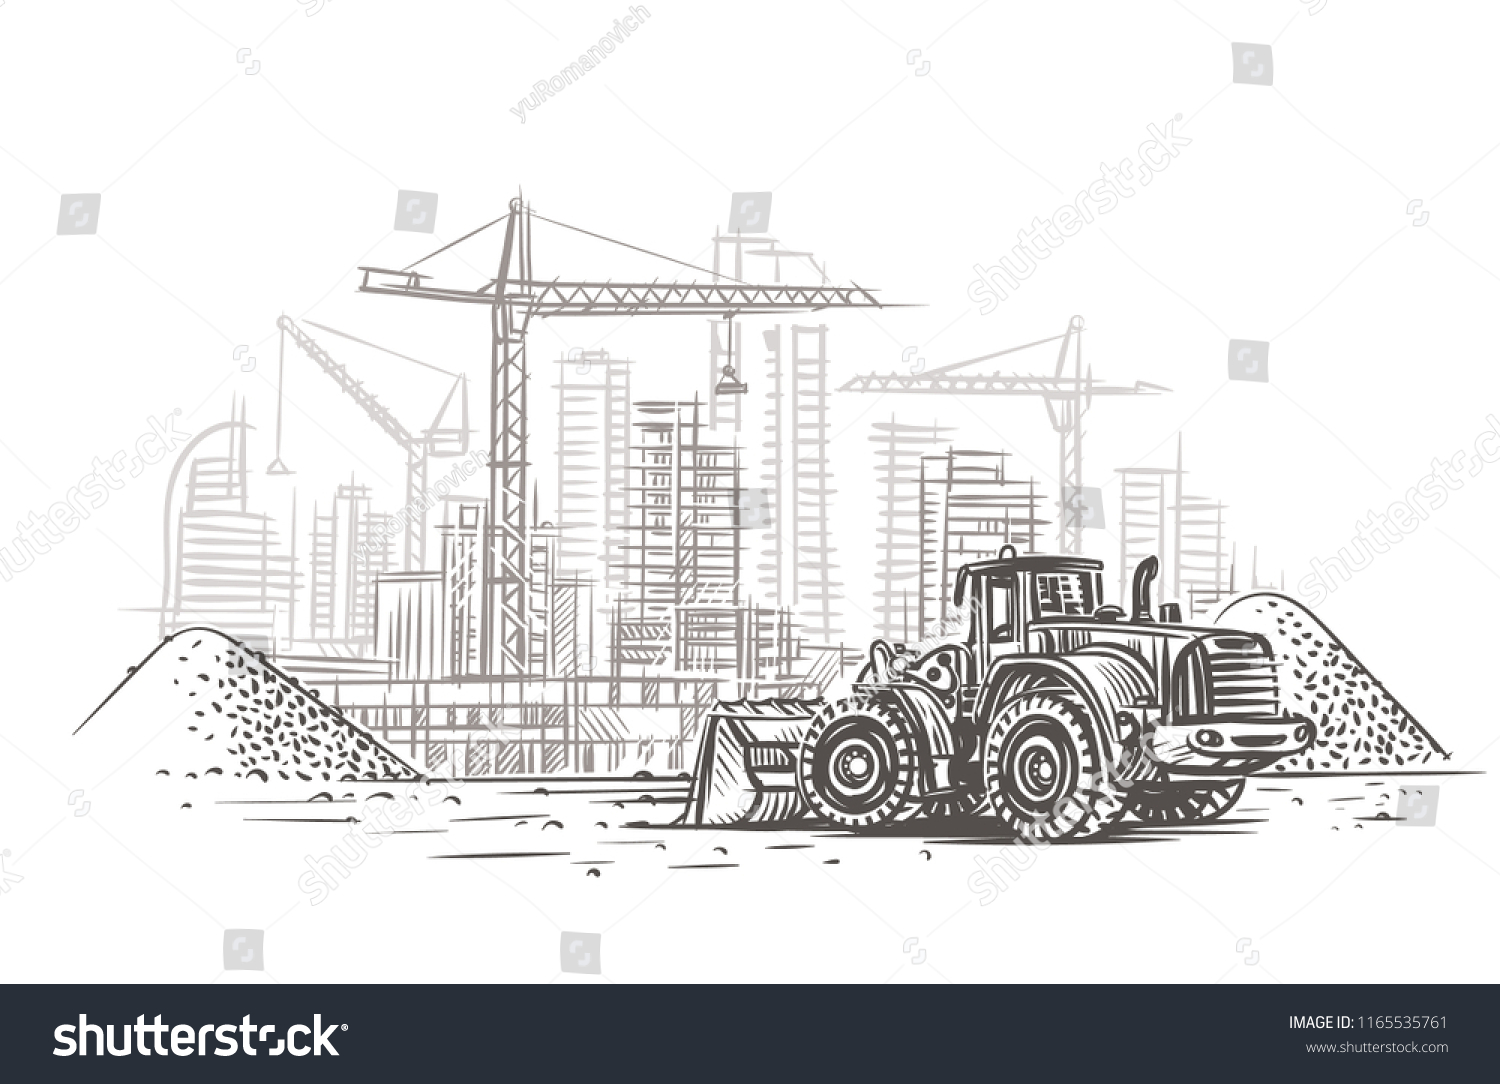 Dozer on construction site sketch. Vector. Layered.